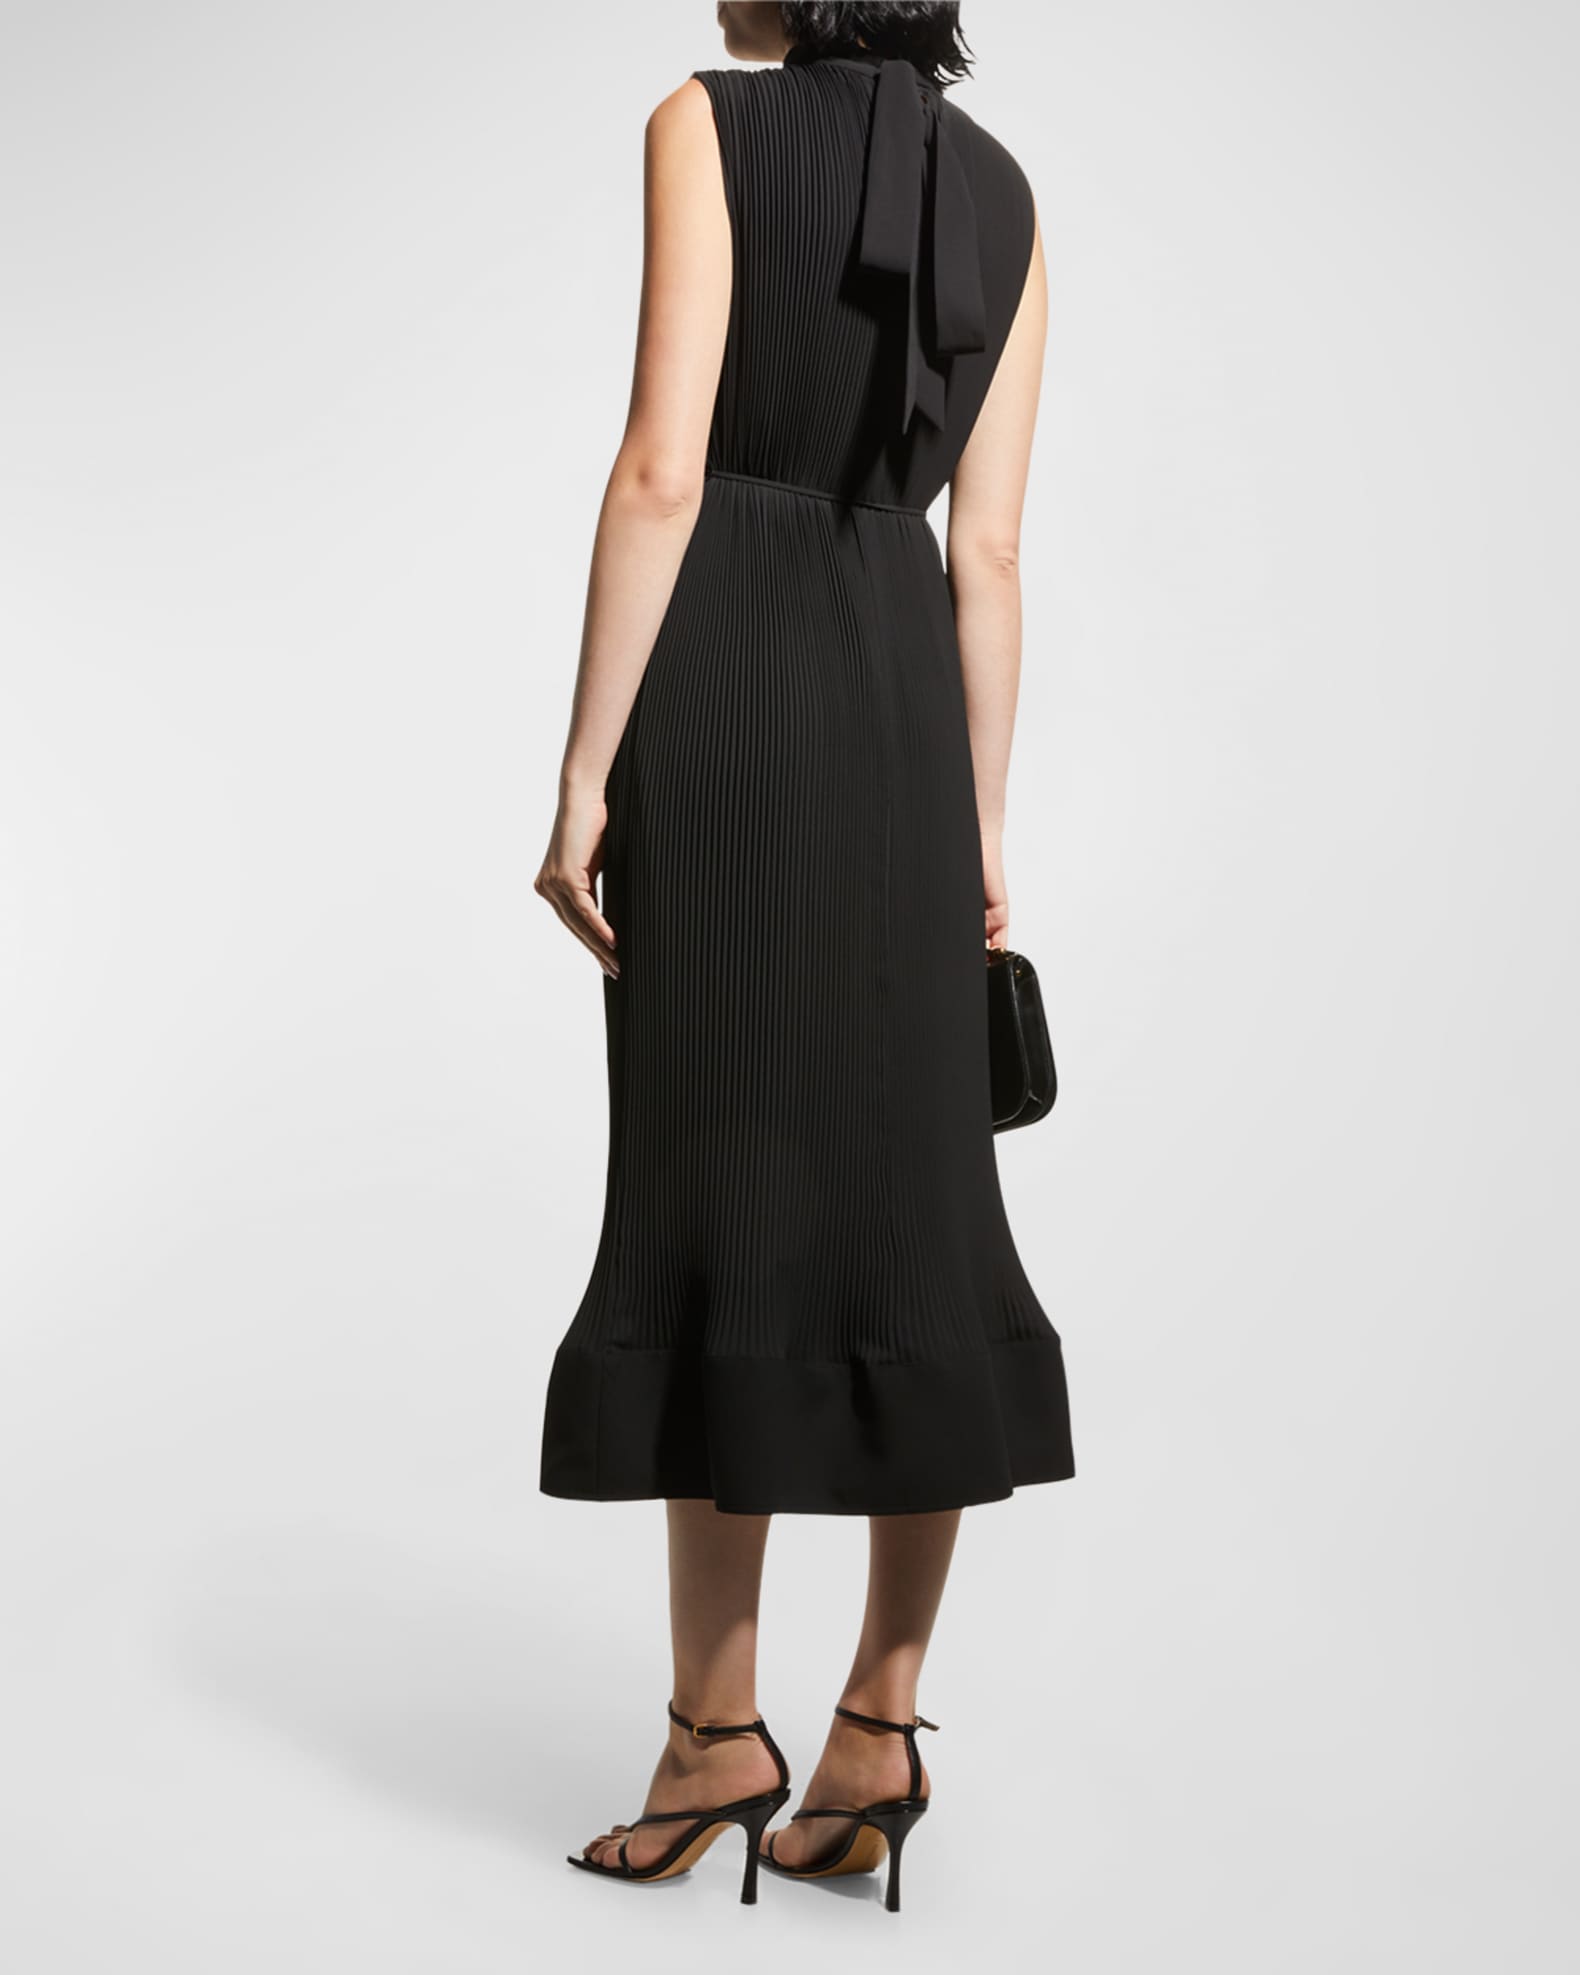 Milly Melina Solid Pleated Dress | Neiman Marcus